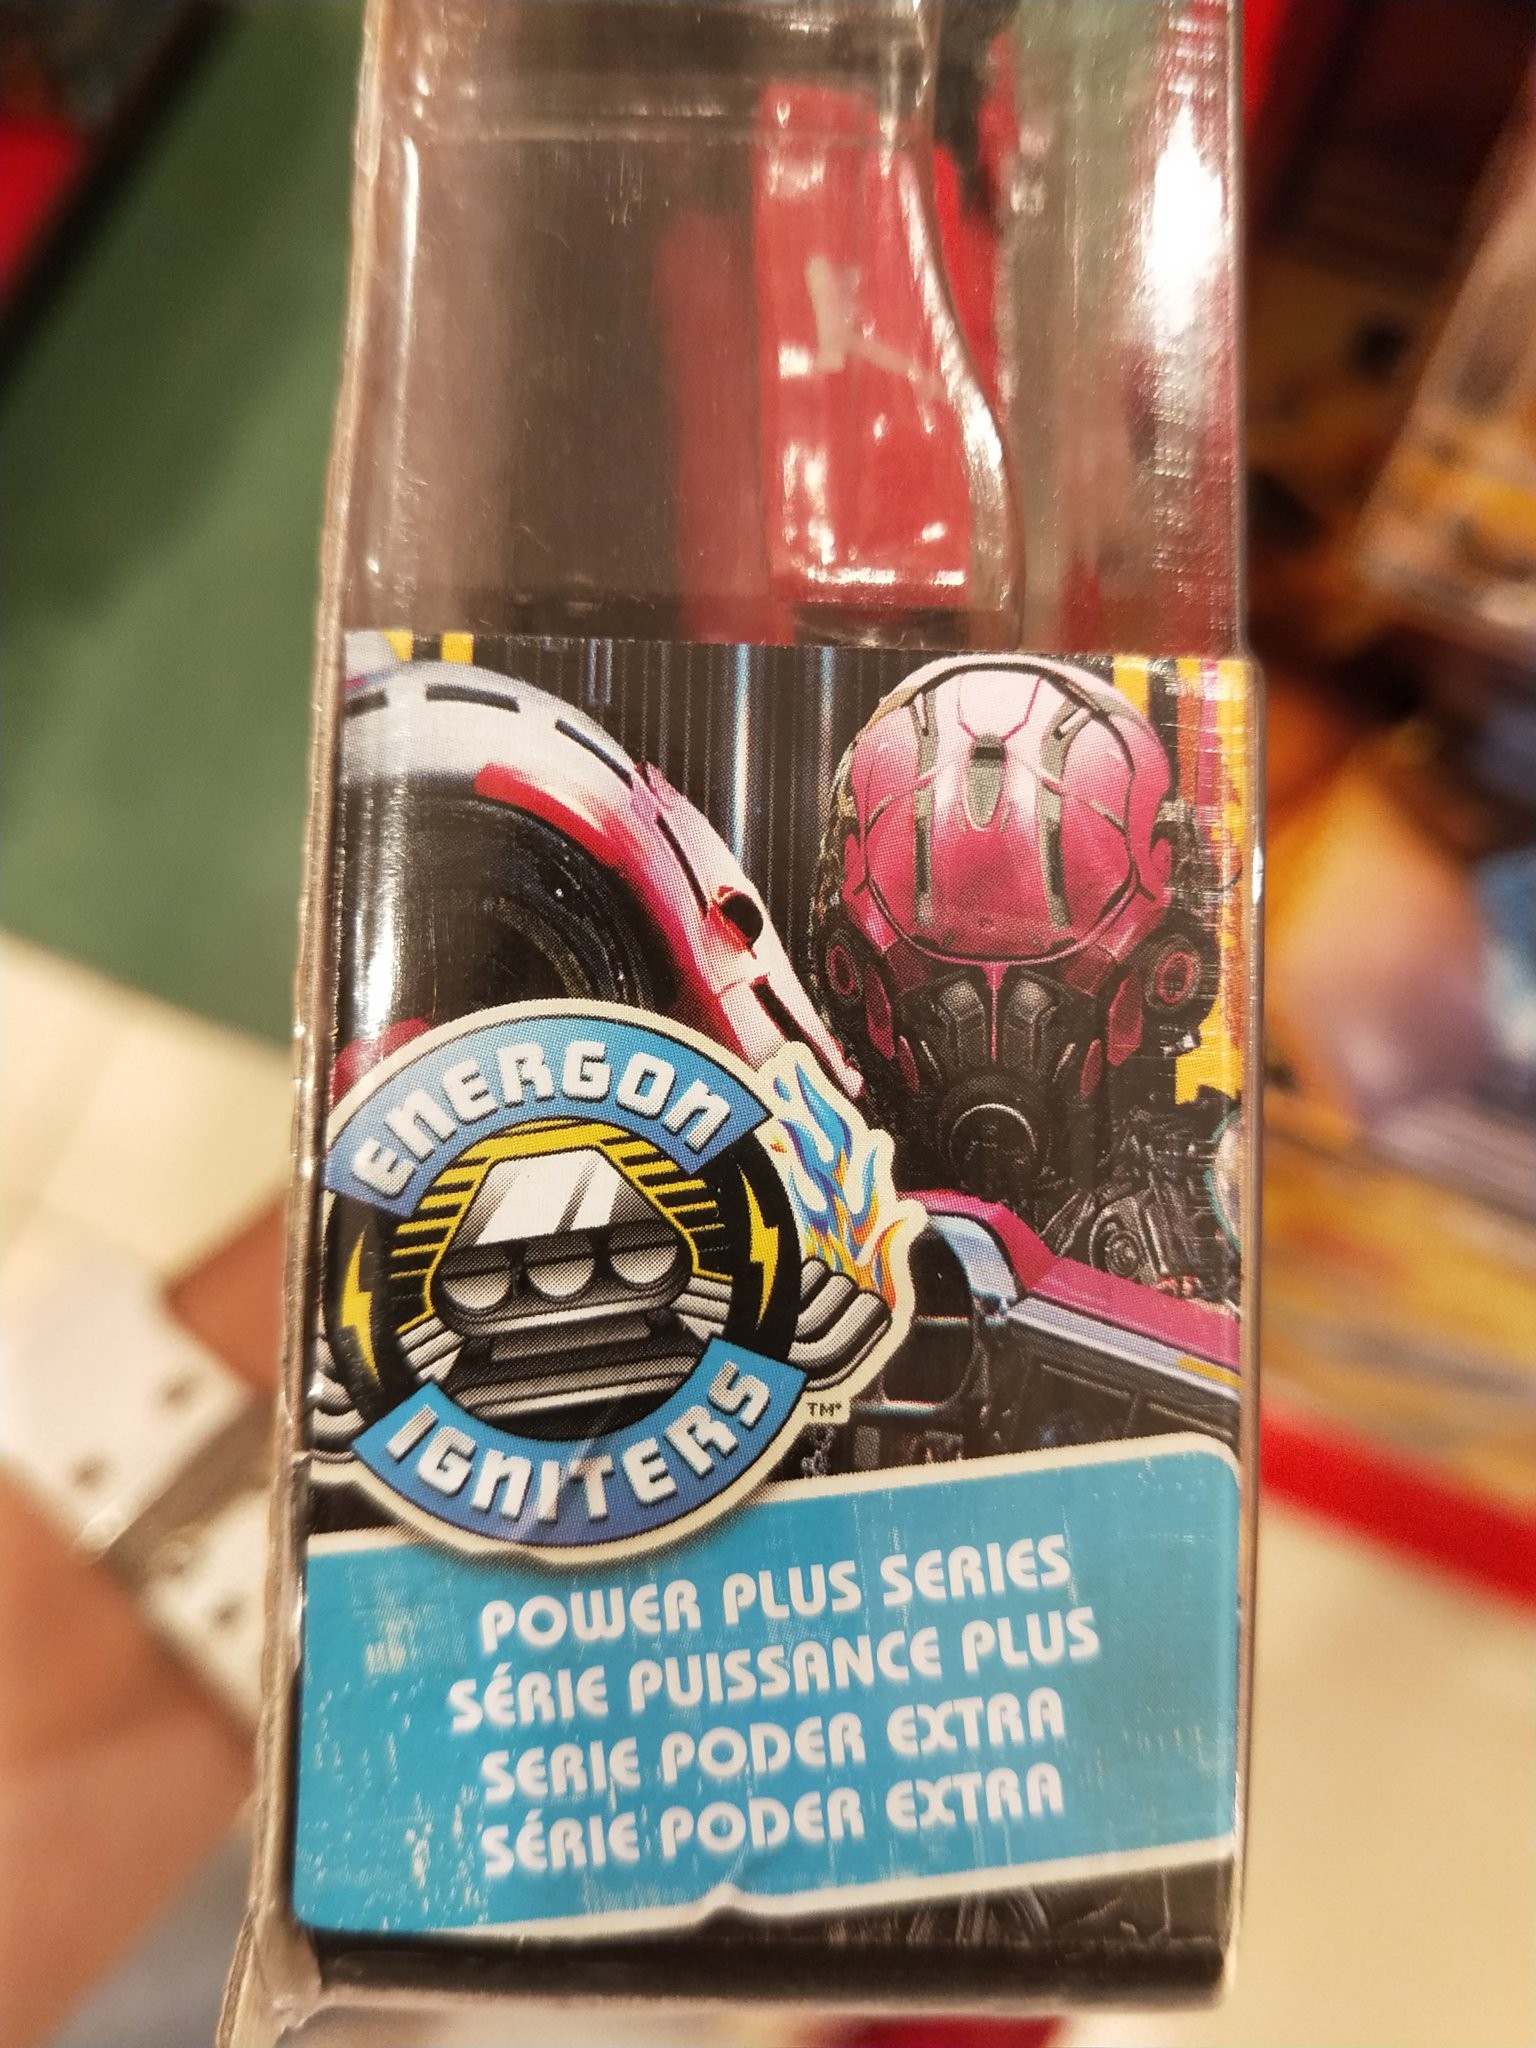 Transformers News: Energon Igniters Power Plus Shatter from Transformers Bumblebee Movie Sighted in Singapore